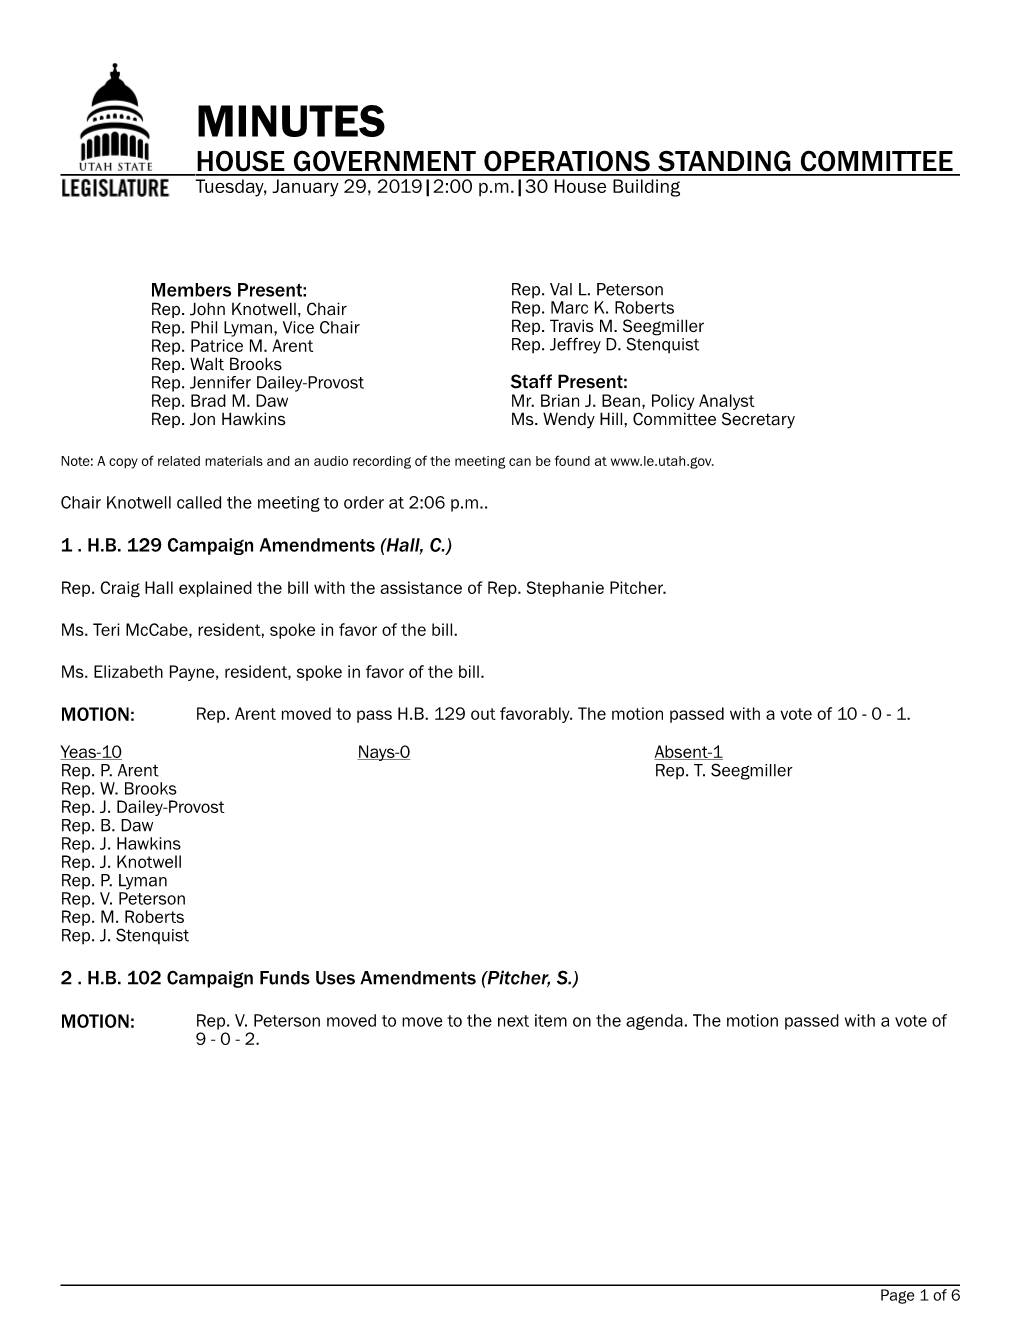 MINUTES HOUSE GOVERNMENT OPERATIONS STANDING COMMITTEE Tuesday, January 29, 2019|2:00 P.M.|30 House Building